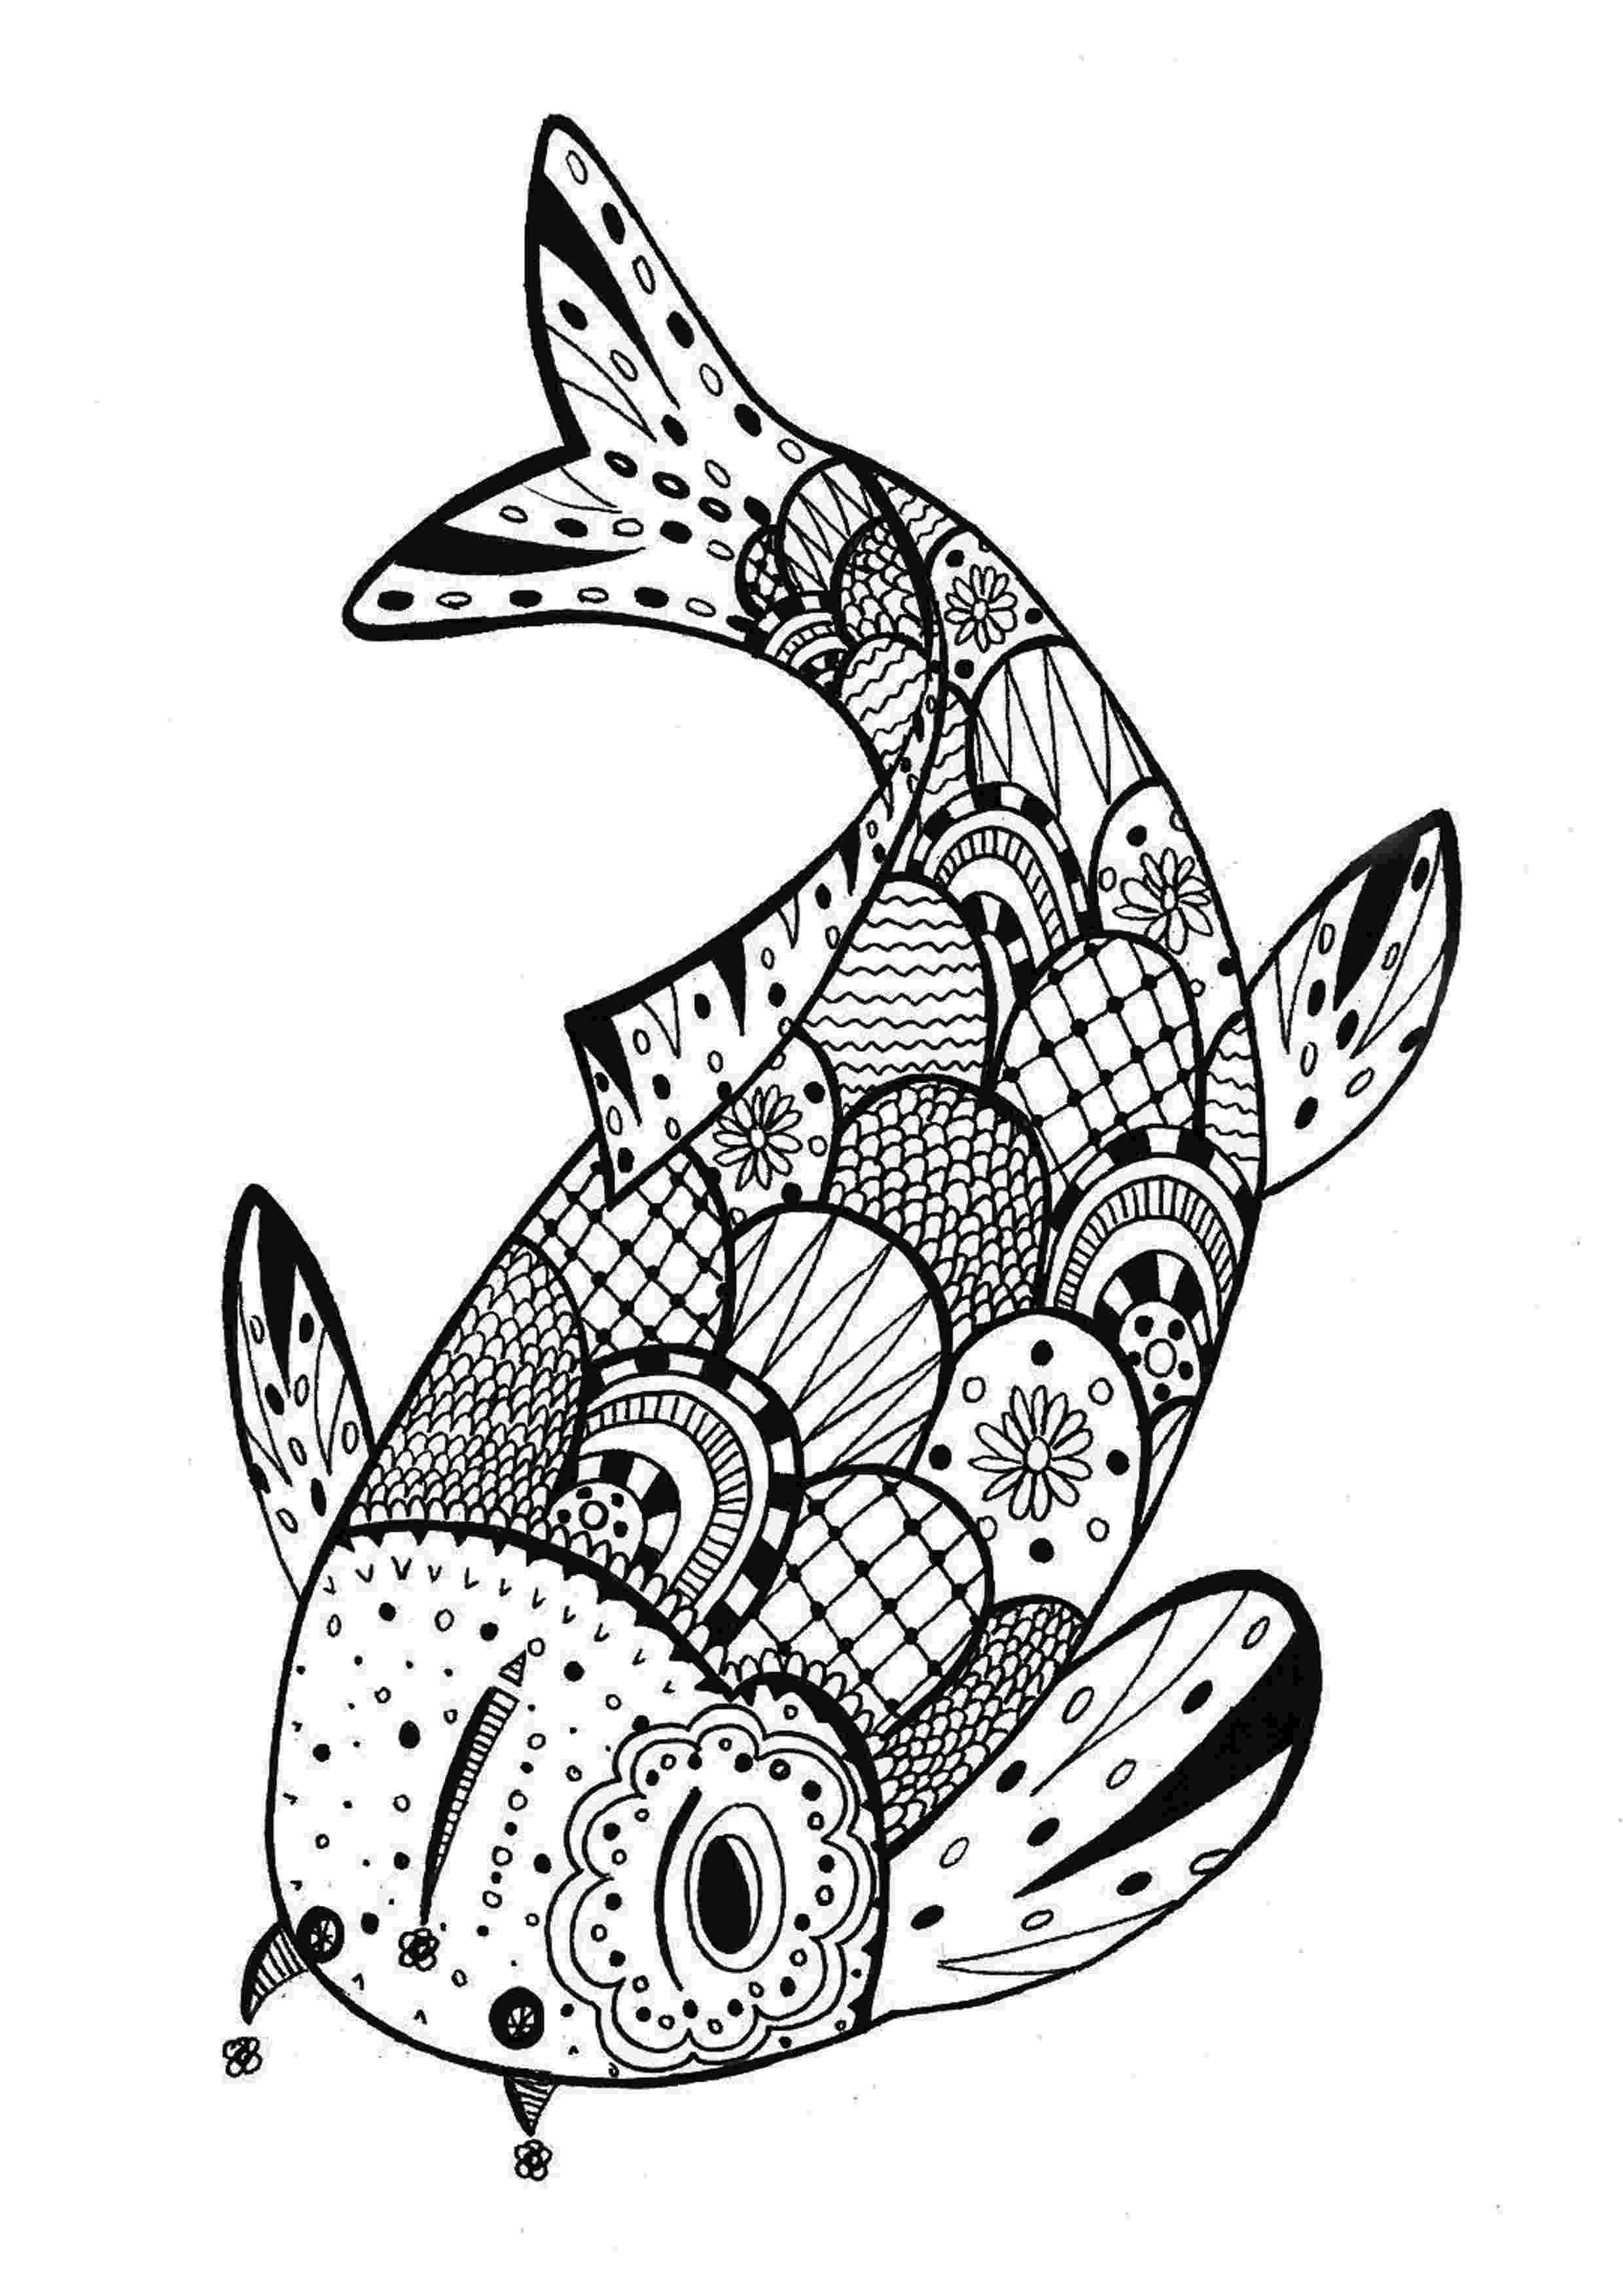 color zentangle 49 zentangle animals inspiration to get started tangling zentangle color 